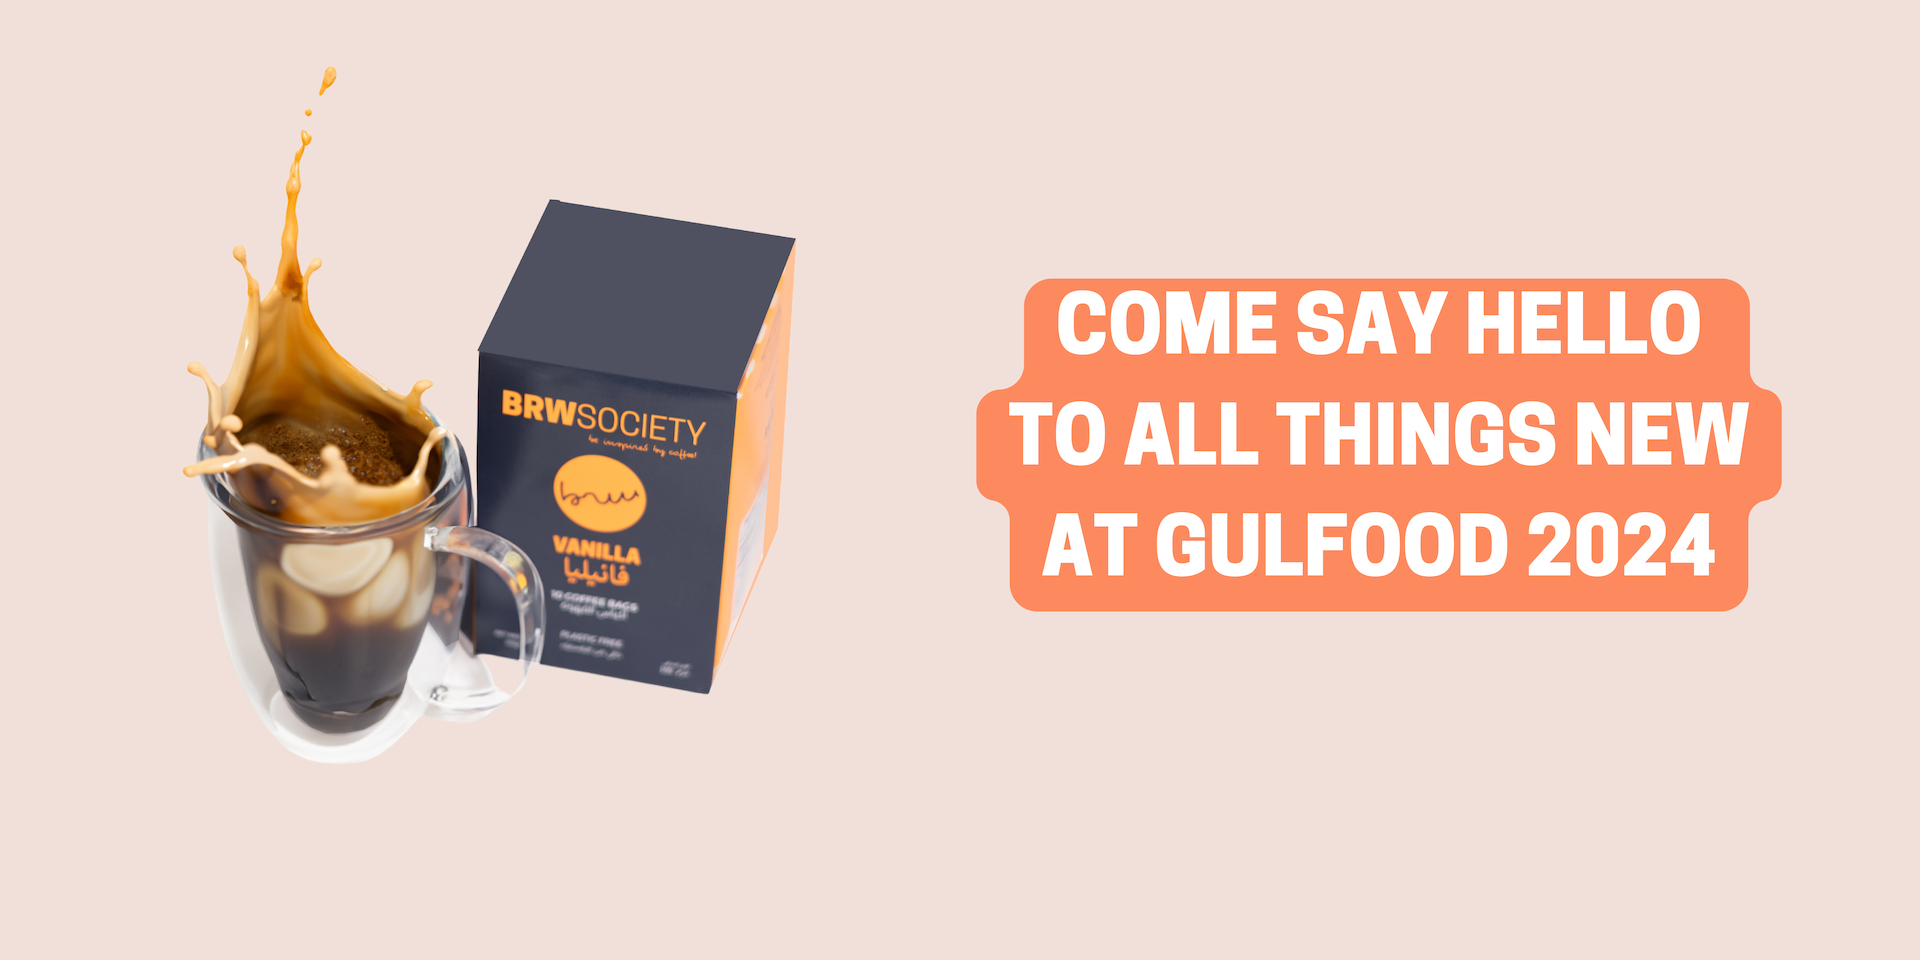 GULFOOD: Where We Are & What To Expect